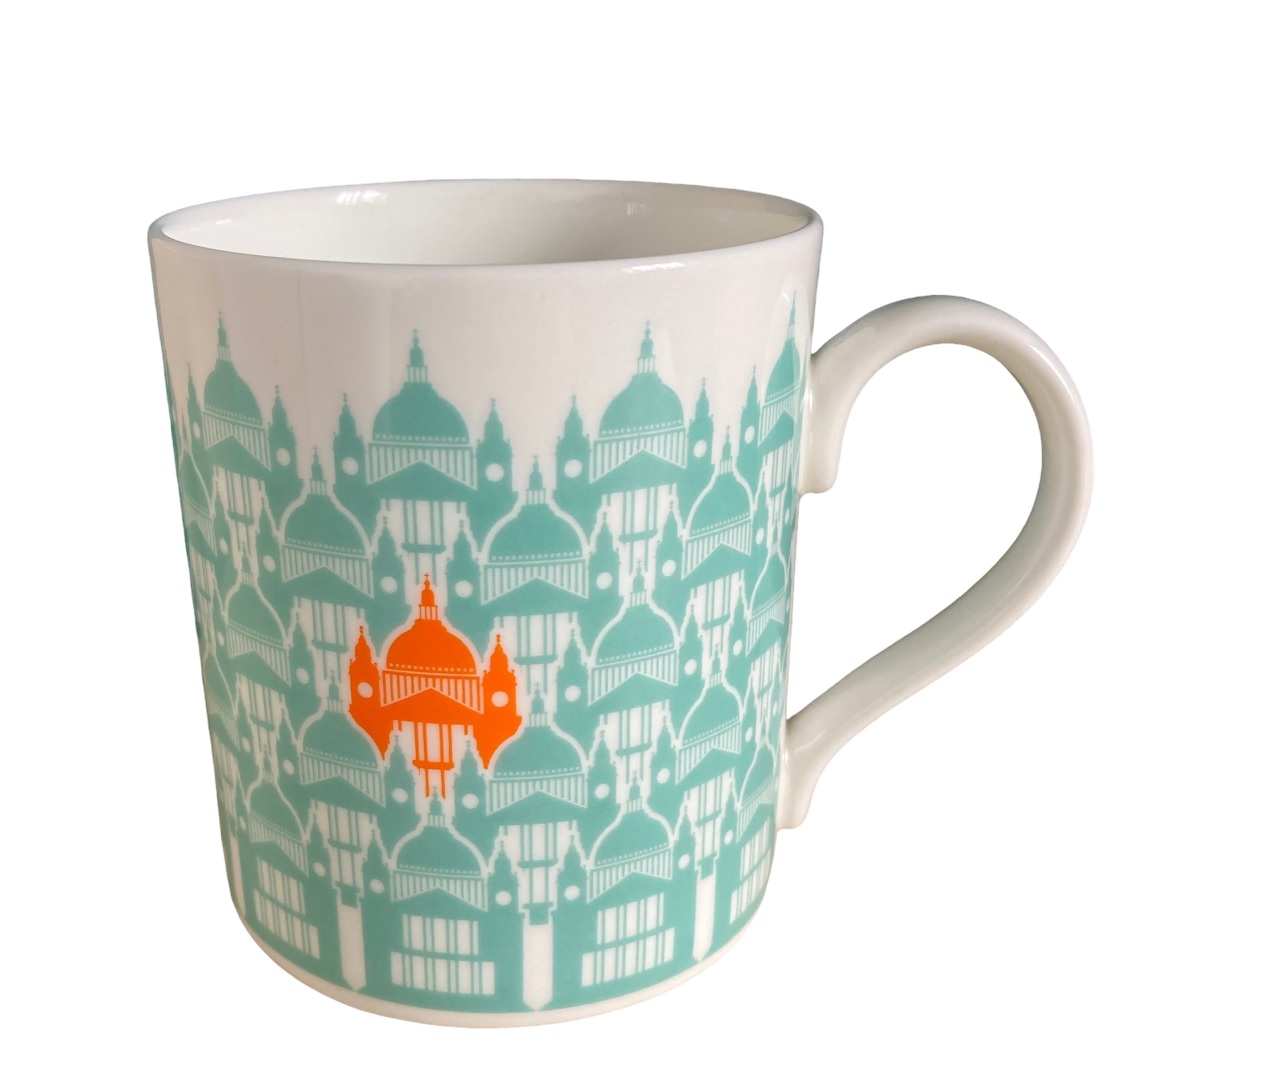 St Paul's Cathedral repeat pattern mug